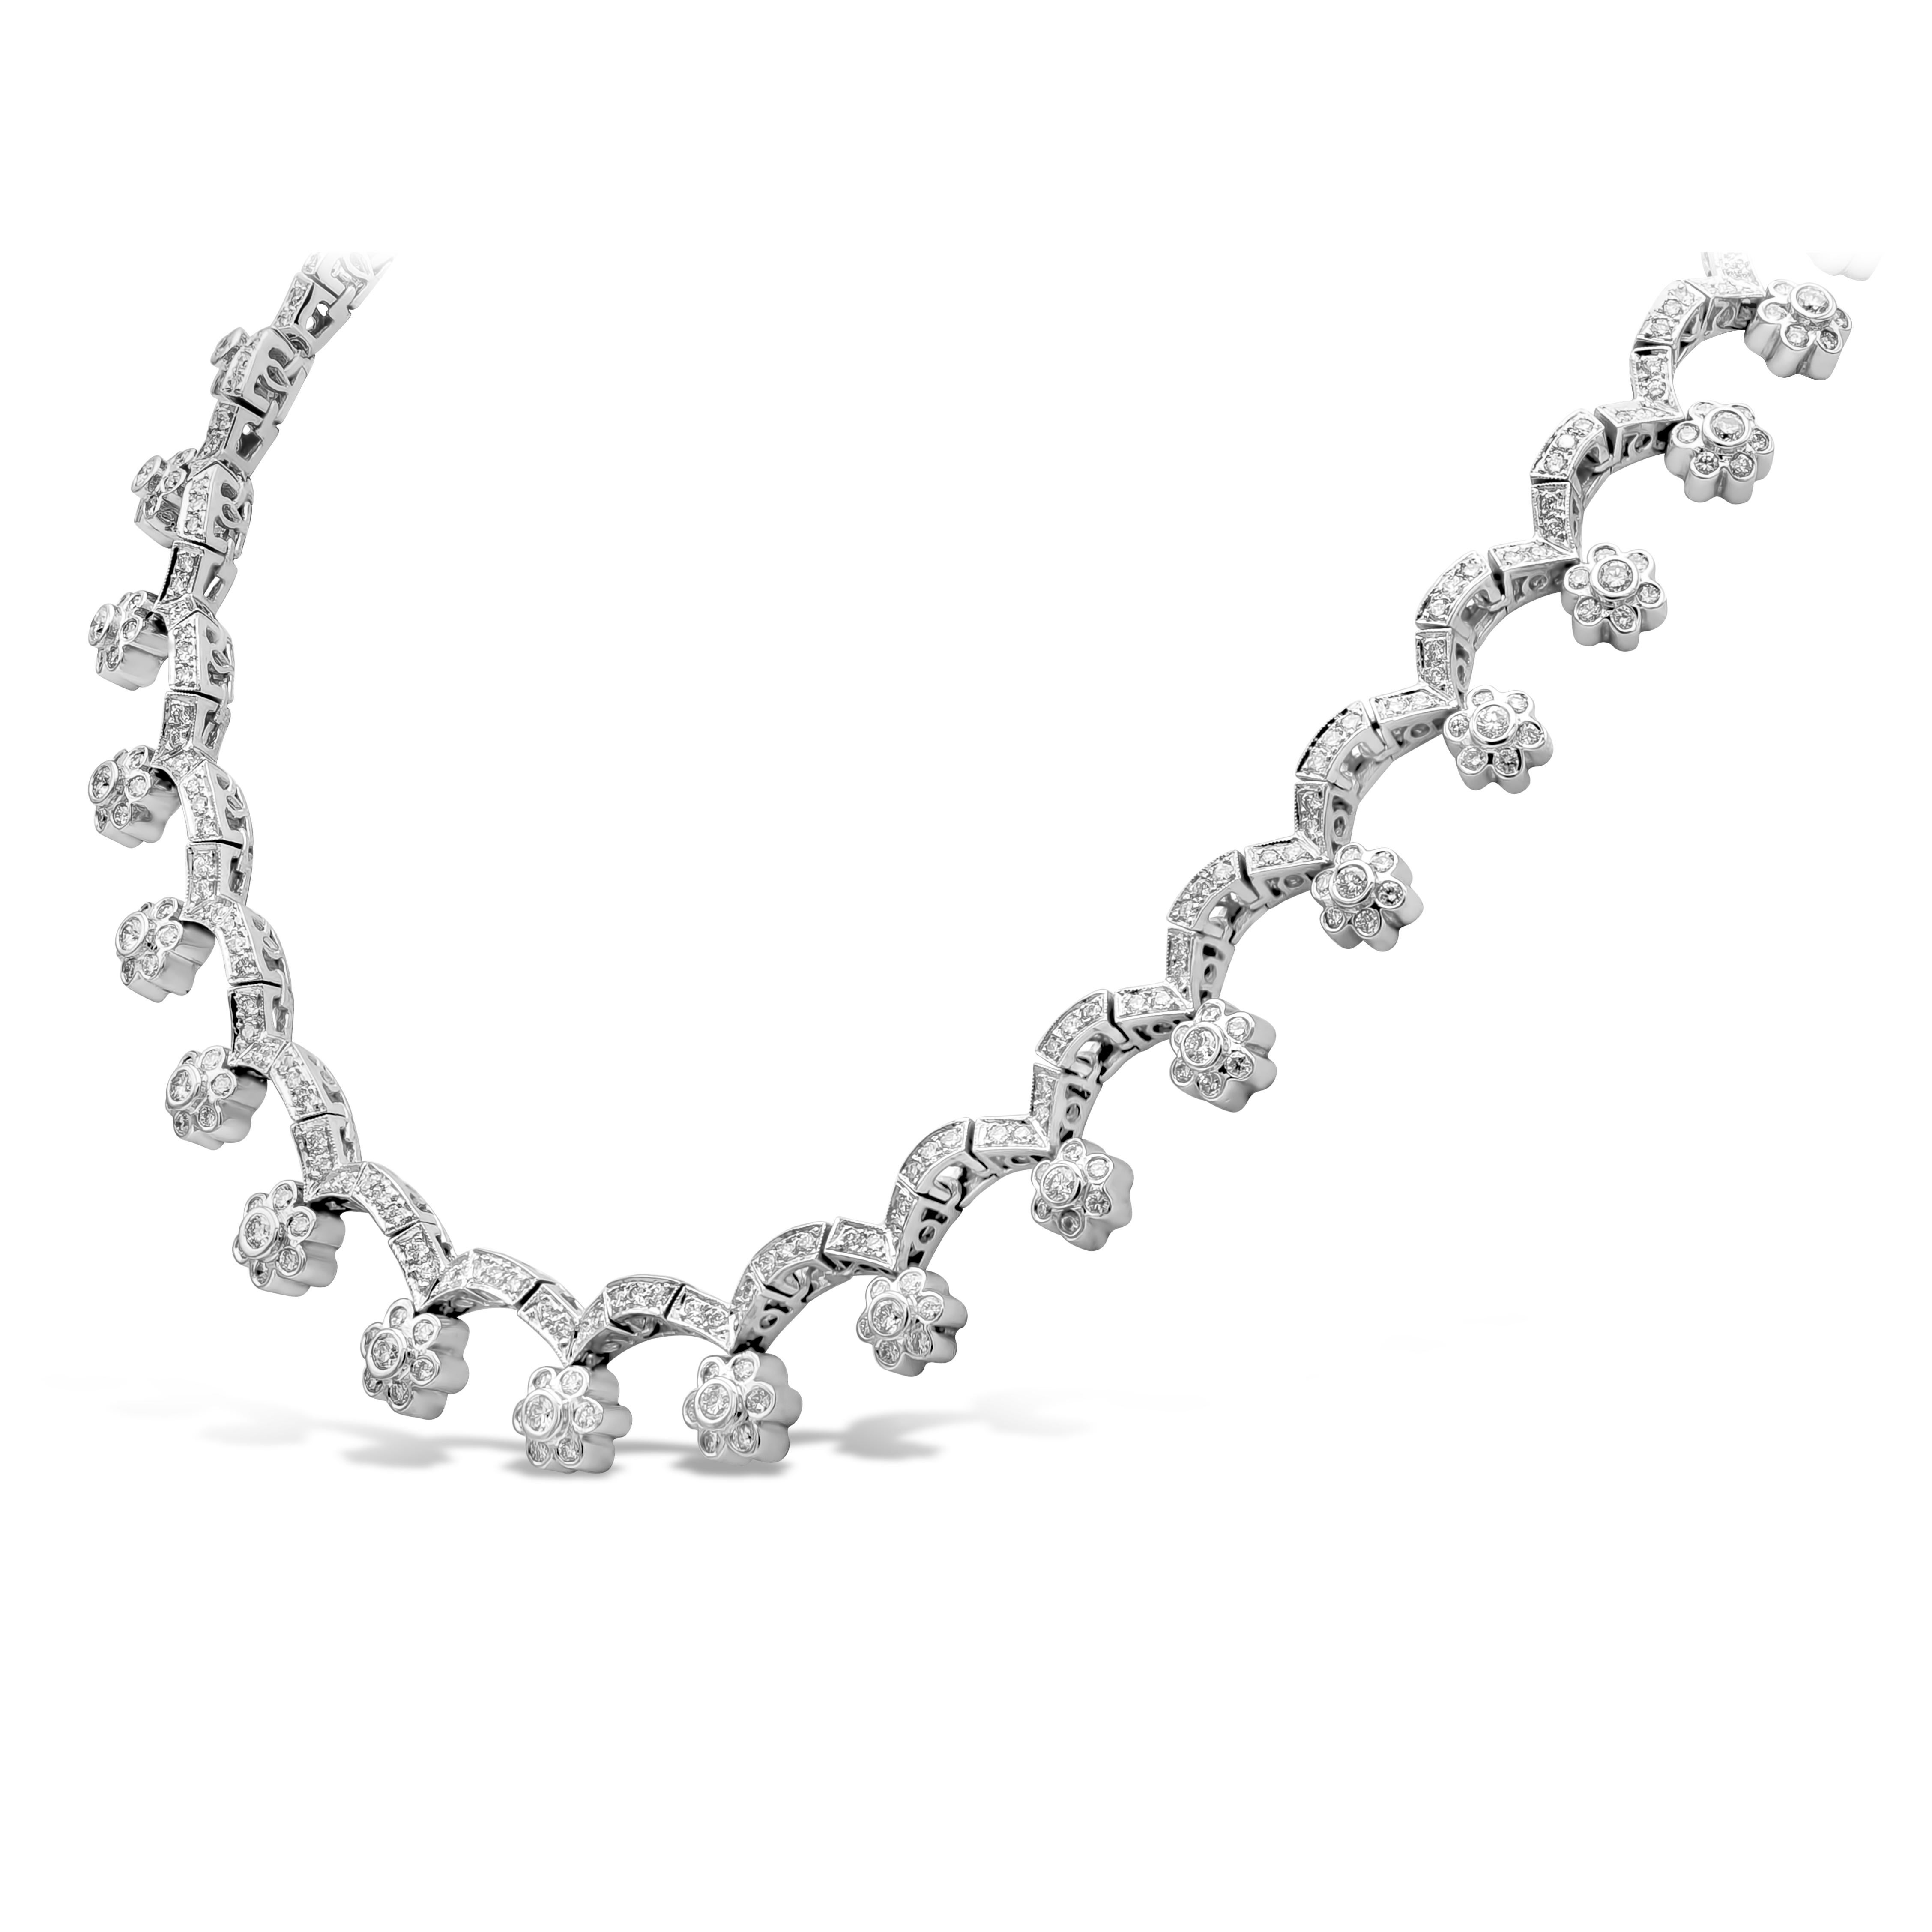 A Flower-Motif design necklace showcasing 10.21 carats total round diamonds, G Color and SI in Clarity. Bezel set flower design suspended in an arched design with melee diamonds. Made with 18K White Gold. 

Style available in different price ranges.